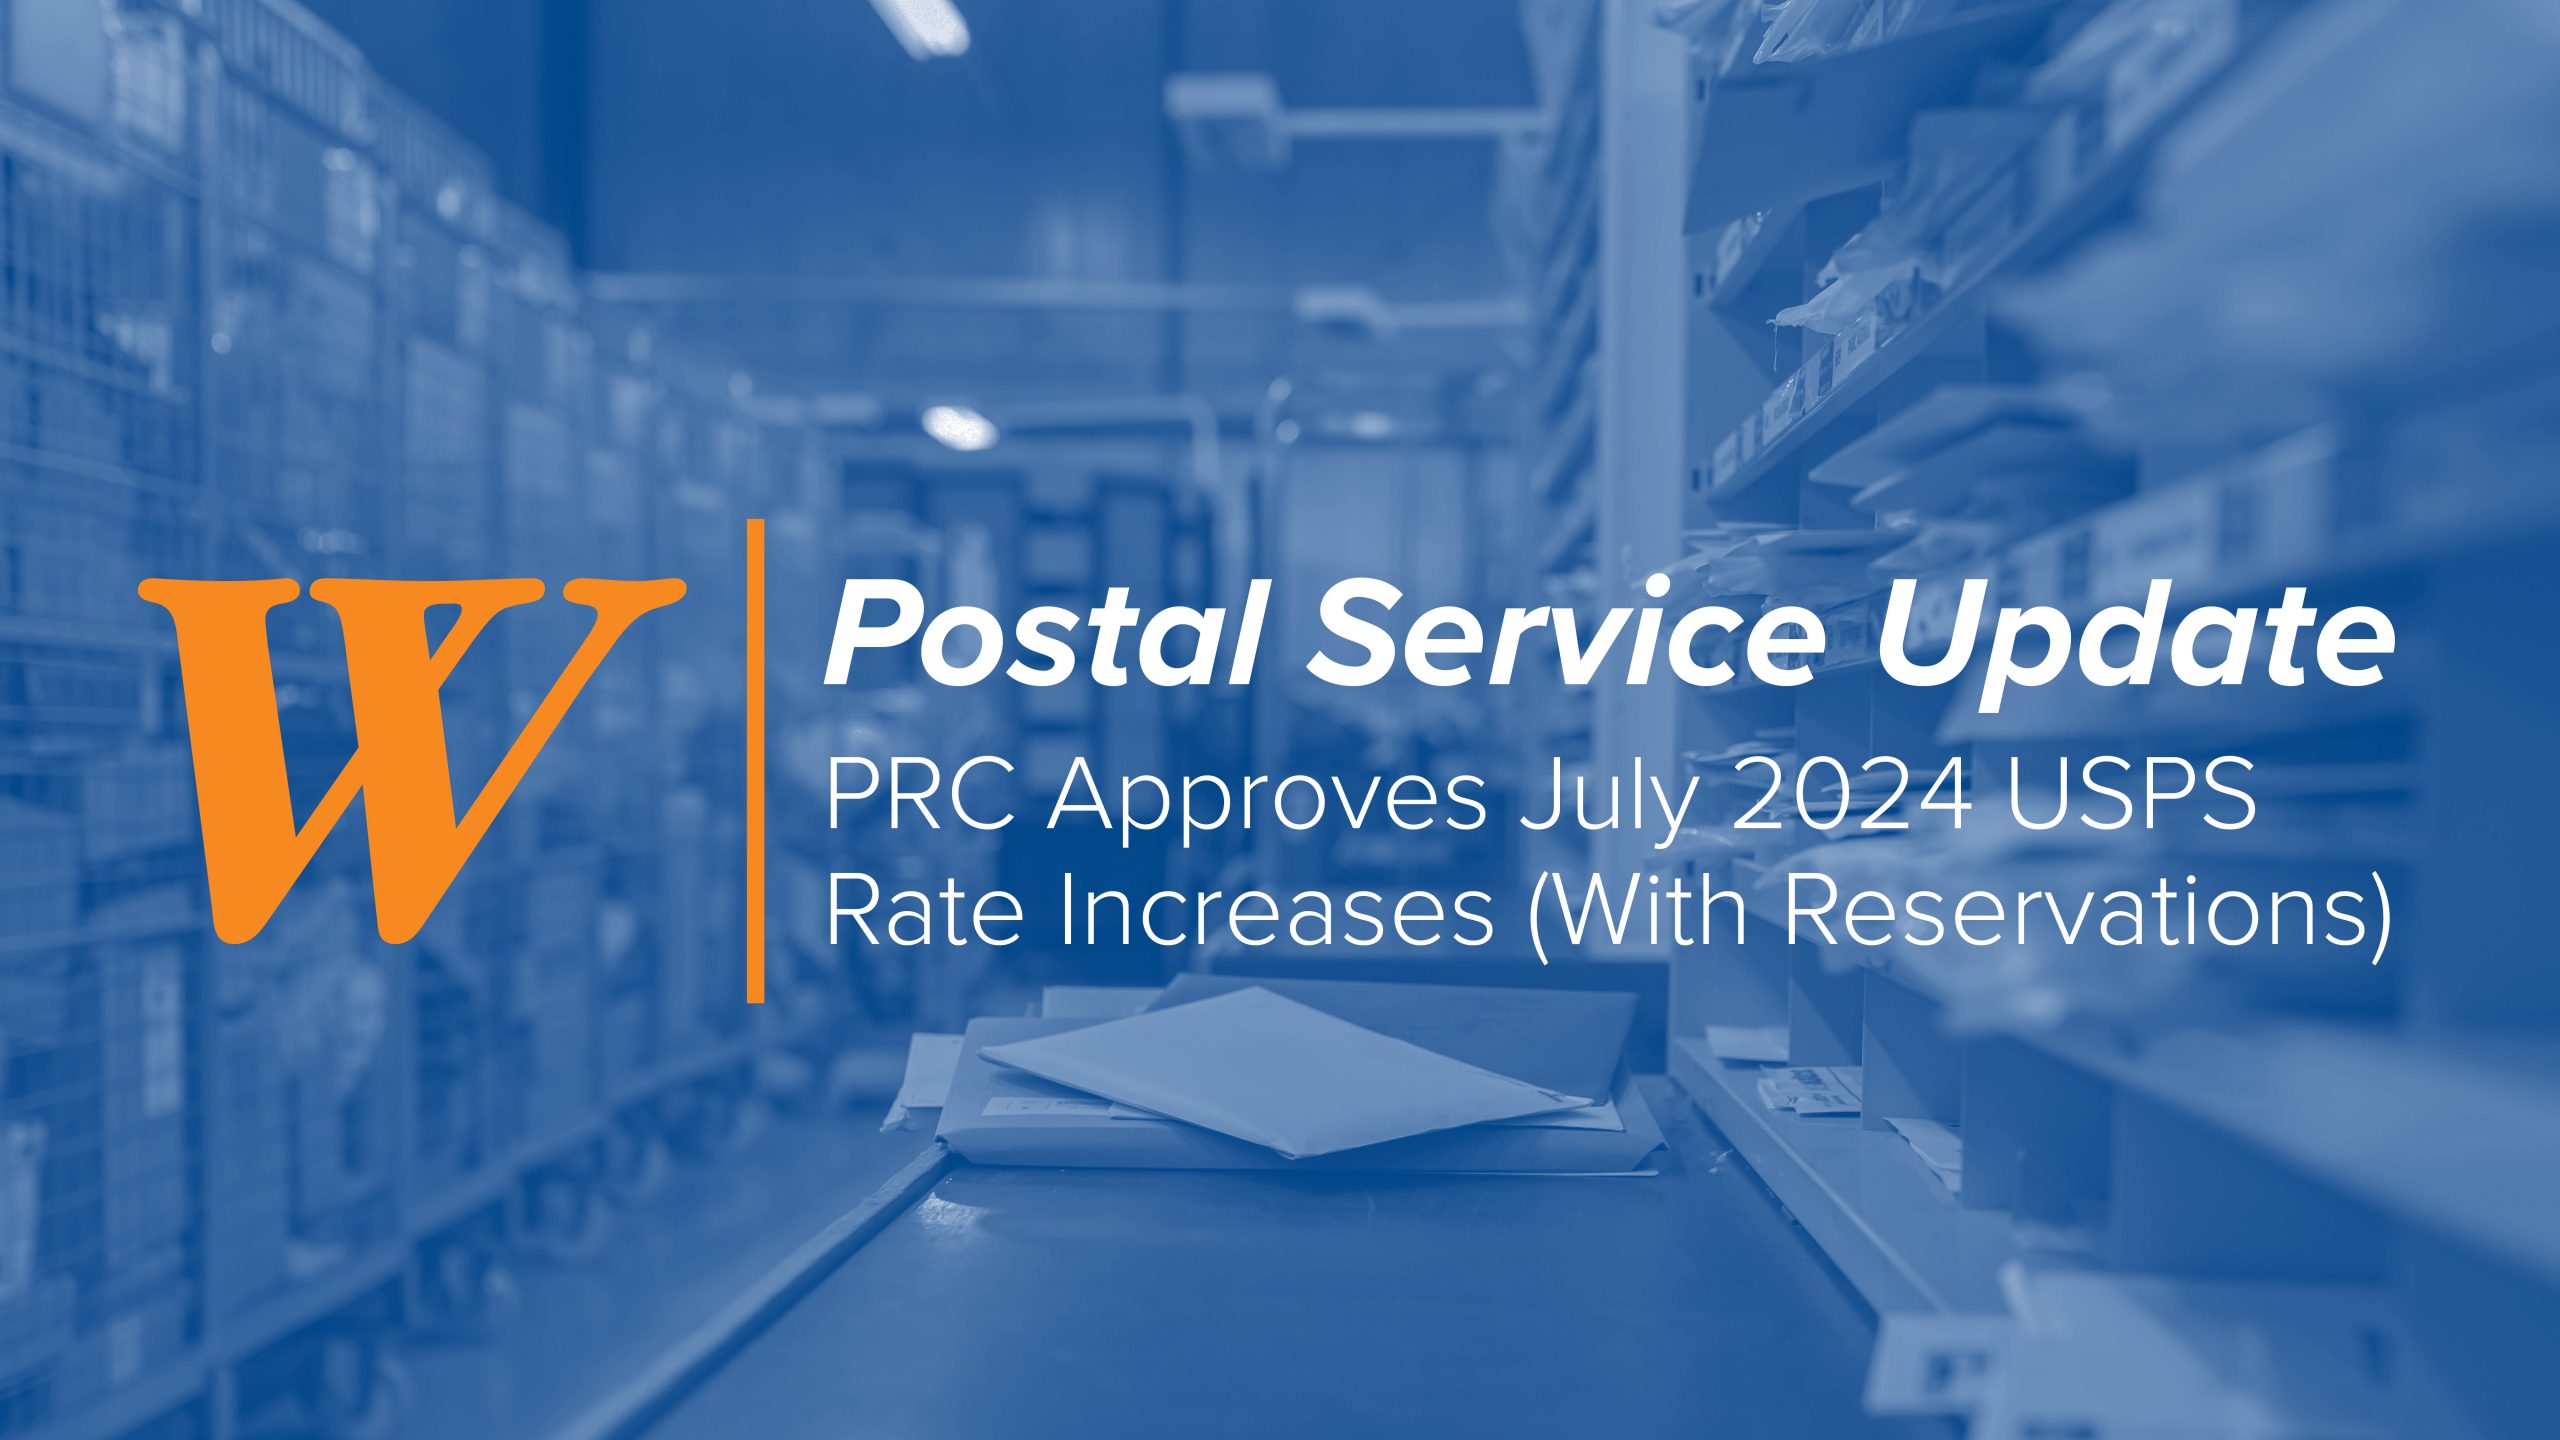 PRC Approves July 2024 USPS Rate Increases (With Reservations)